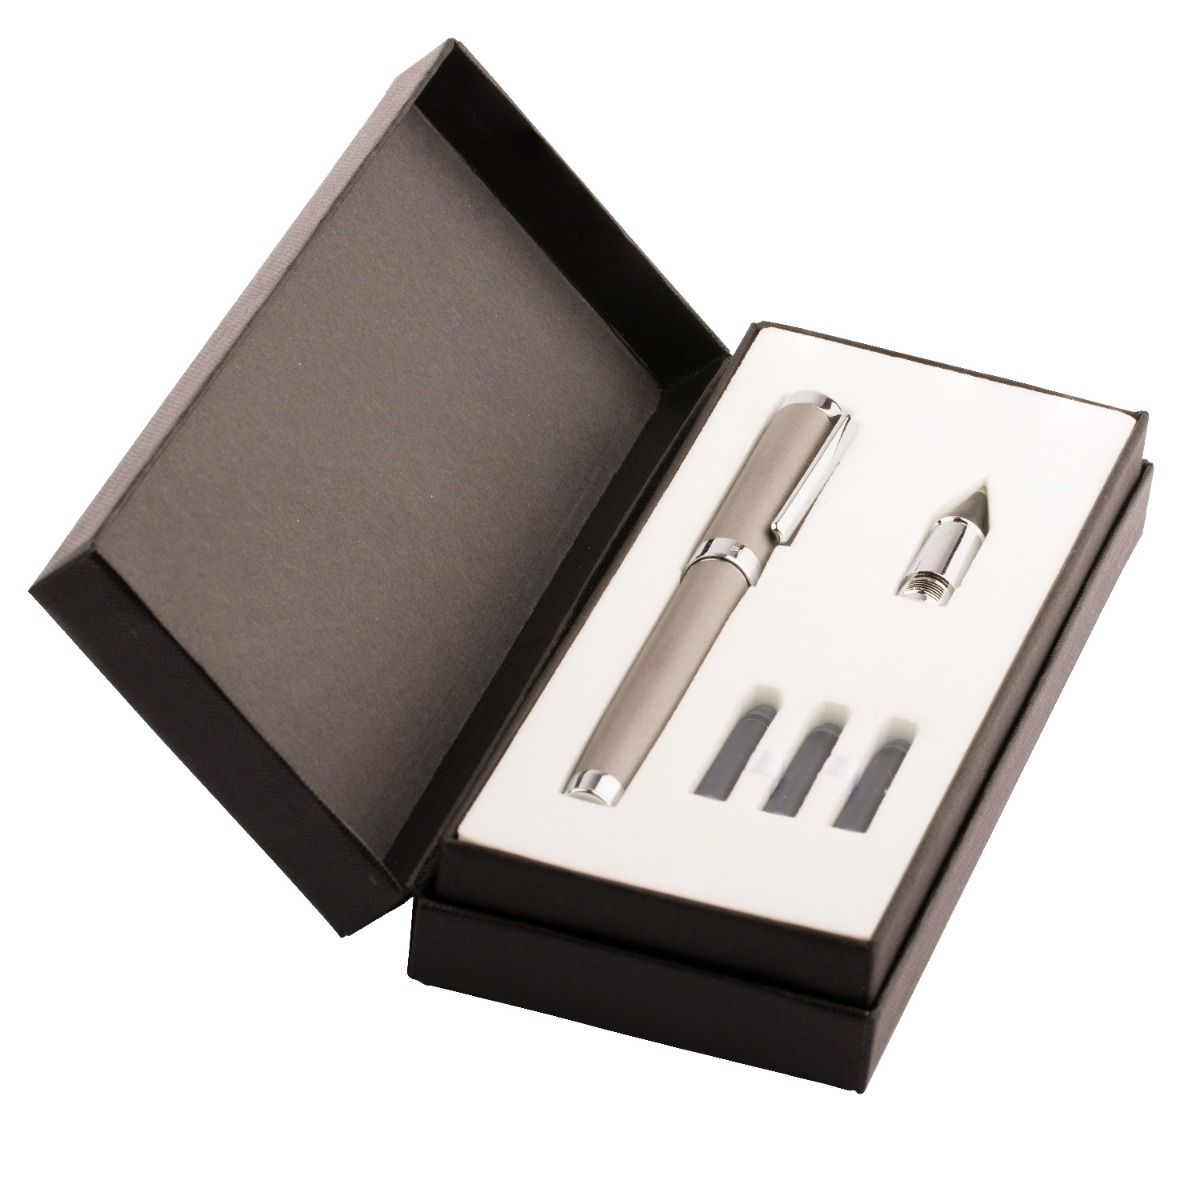 Pennline Twin Roller Fountain Pen Kit - Matte Grey With Chrome Trims